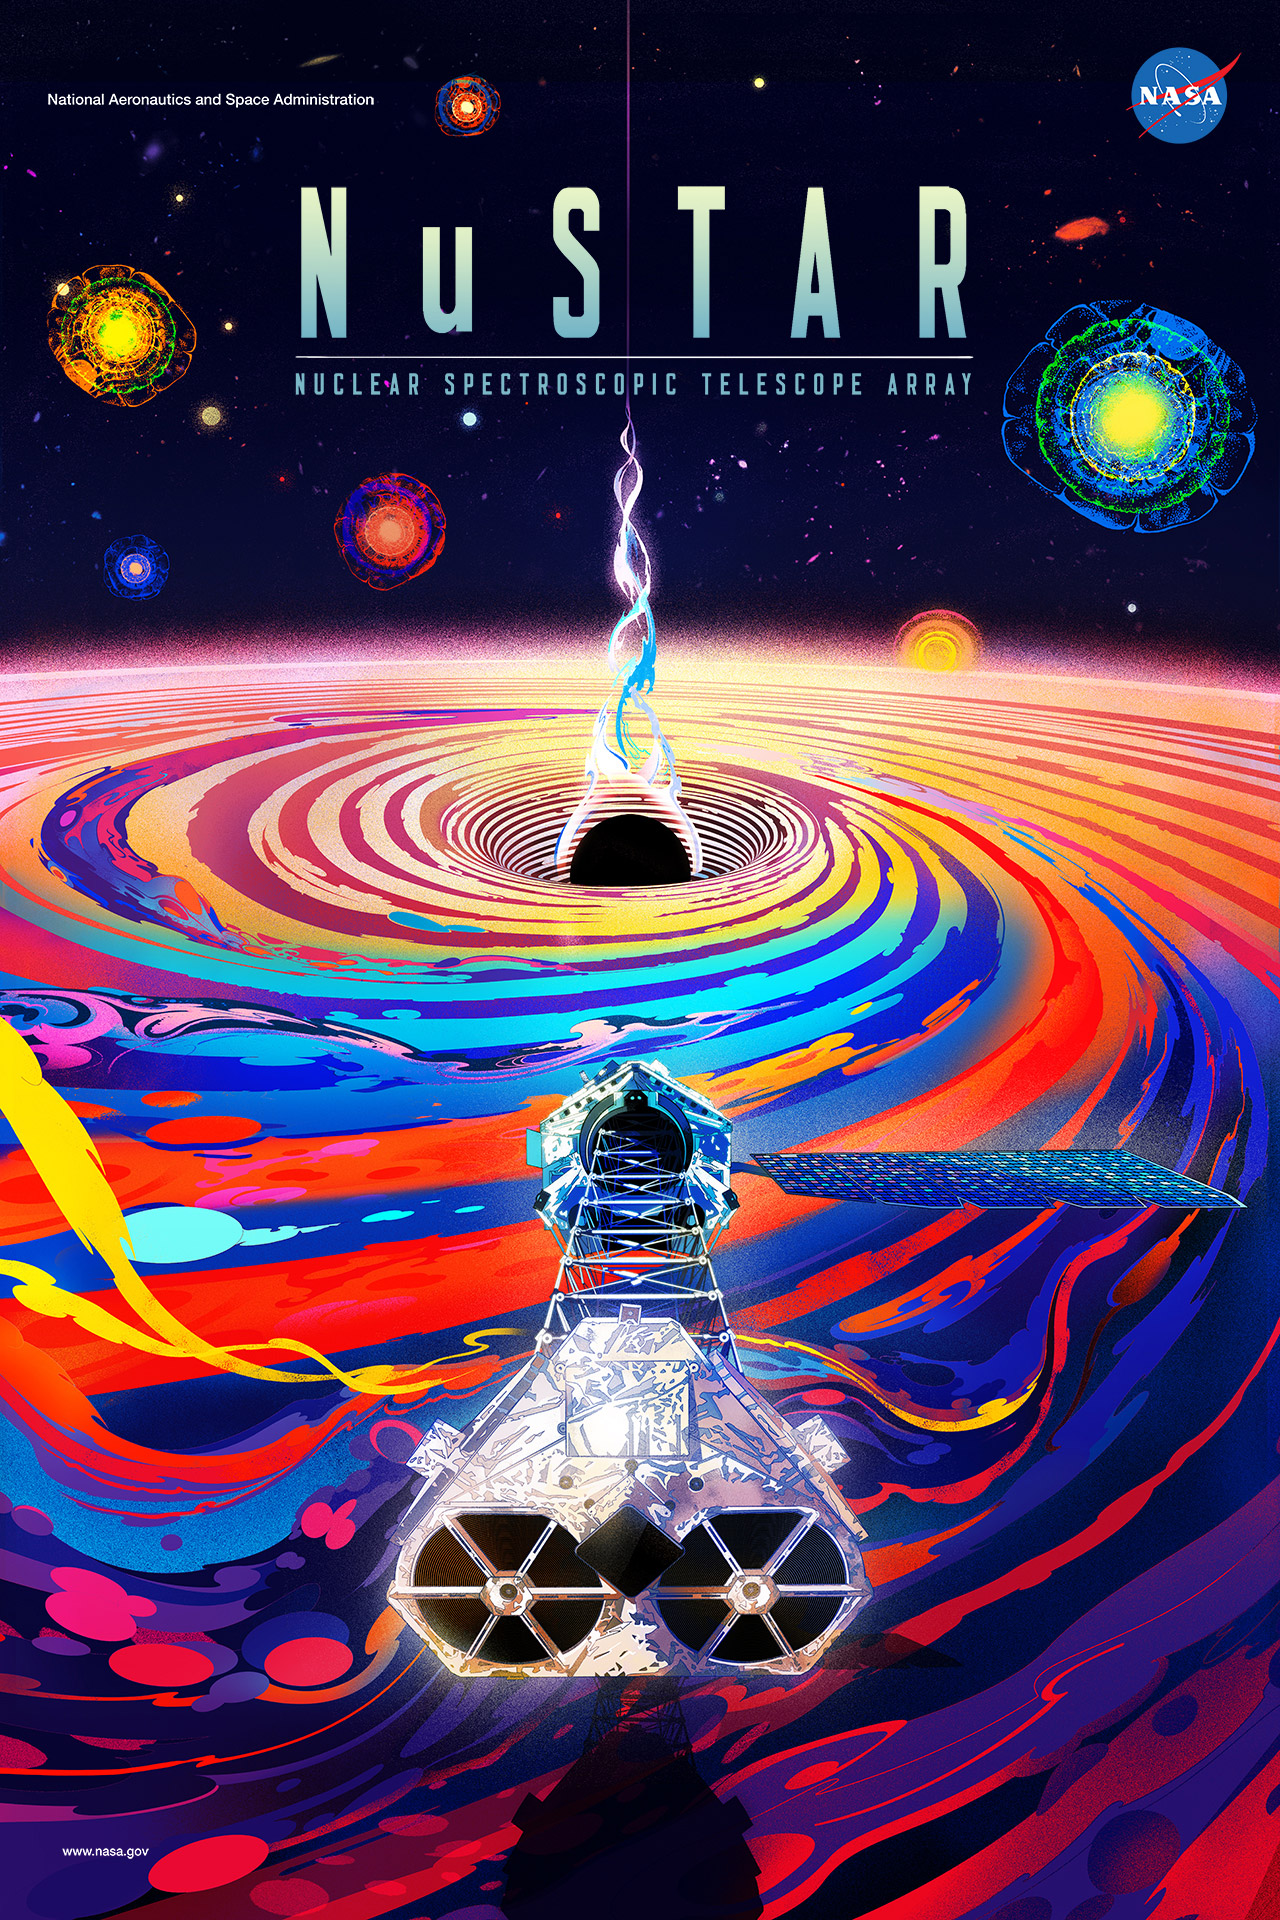 NuSTAR is the first space telescope able to focus high-energy X-rays. This colorful poster was made in celebration of the mission’s 10-year anniversary.